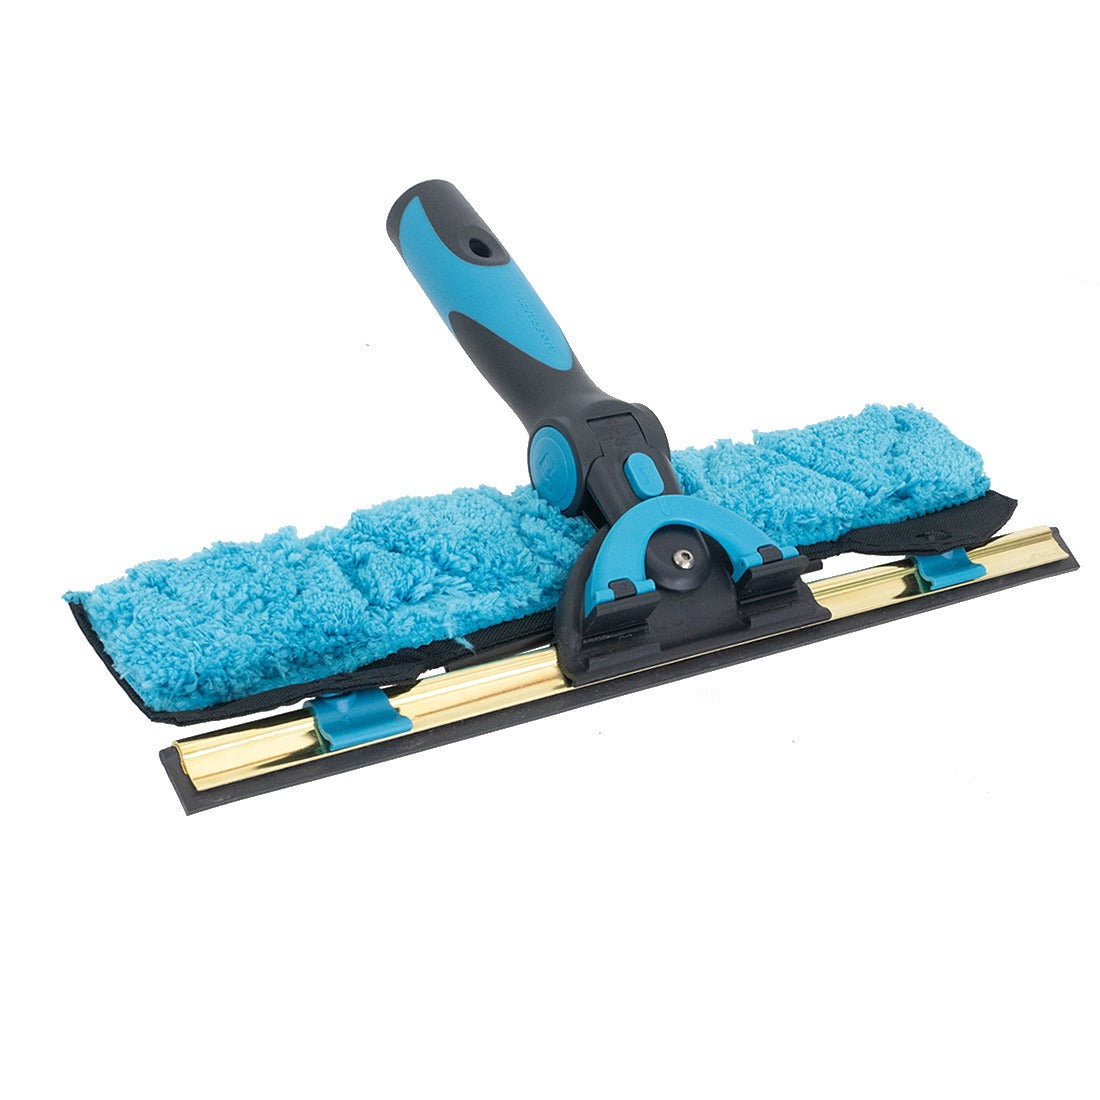 4 Meter Window Cleaning Brush + Window Cleaner Squeegee Attachment